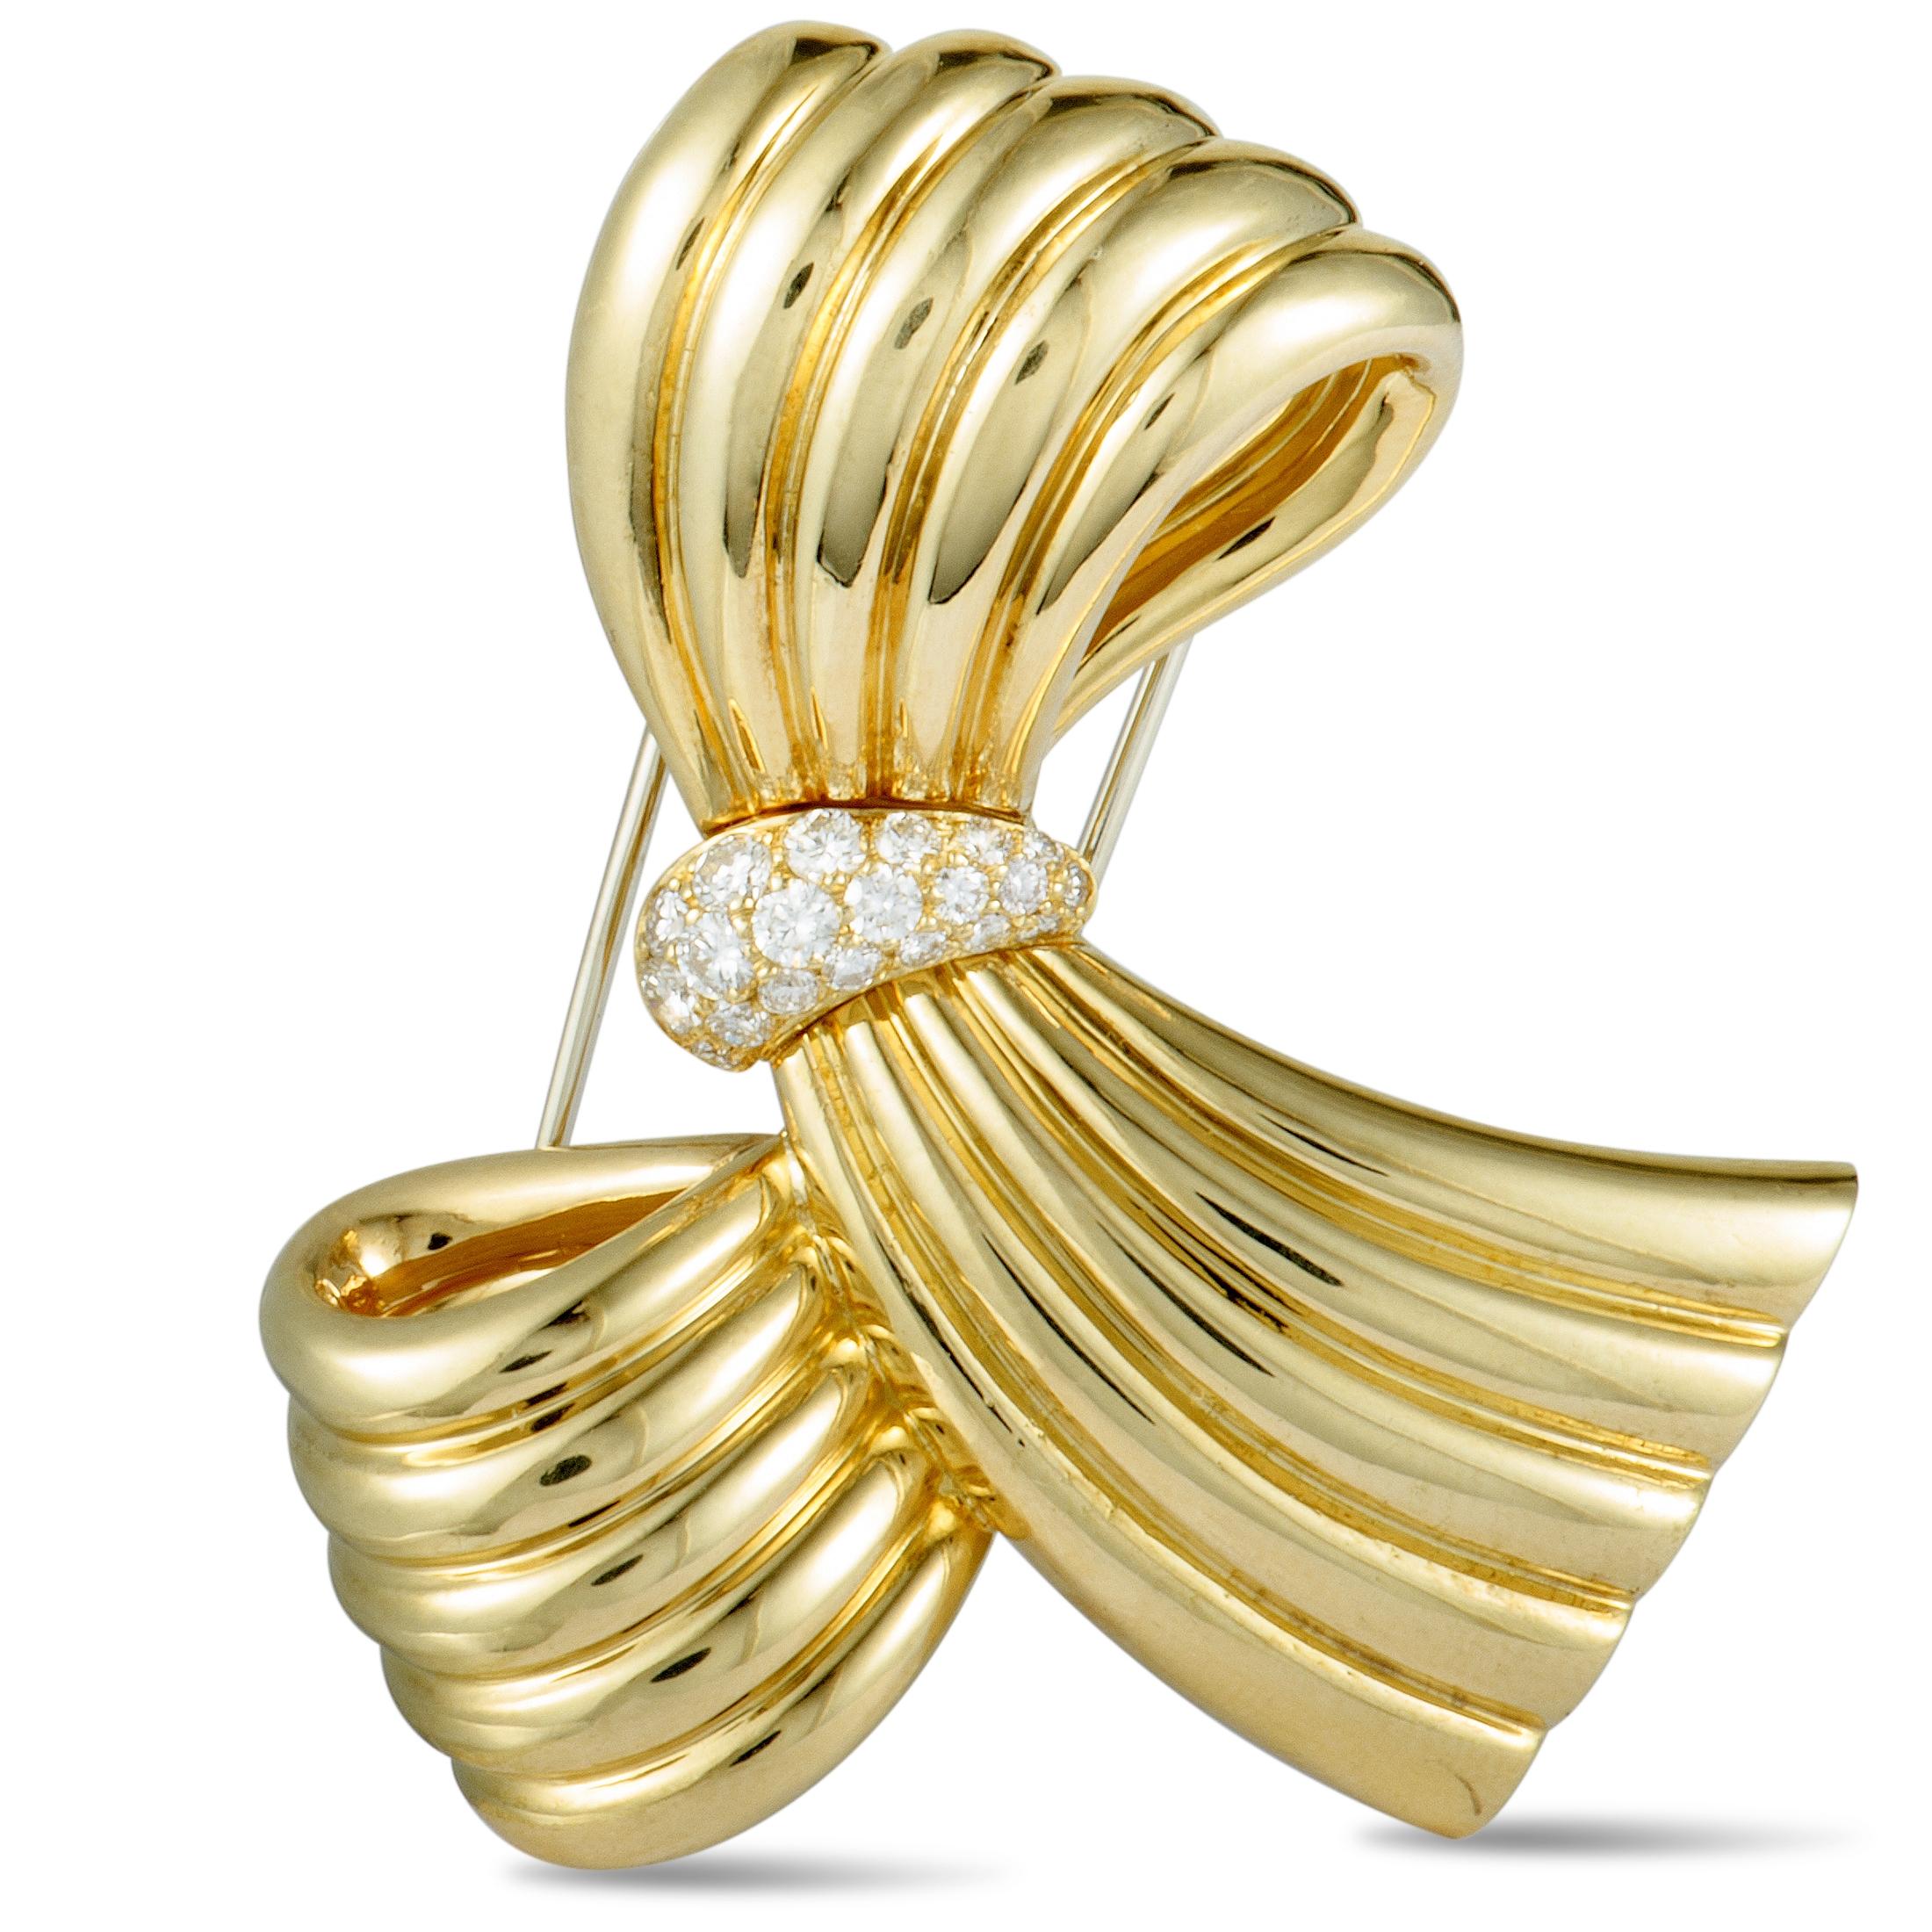 Prestigious elegance is embodied into this classy brooch by Van Cleef & Arpels whose compelling bow design makes it a noteworthy piece of jewelry. The stunning brooch is expertly crafted from alluring 18K yellow gold and embellished with 0.76ct of